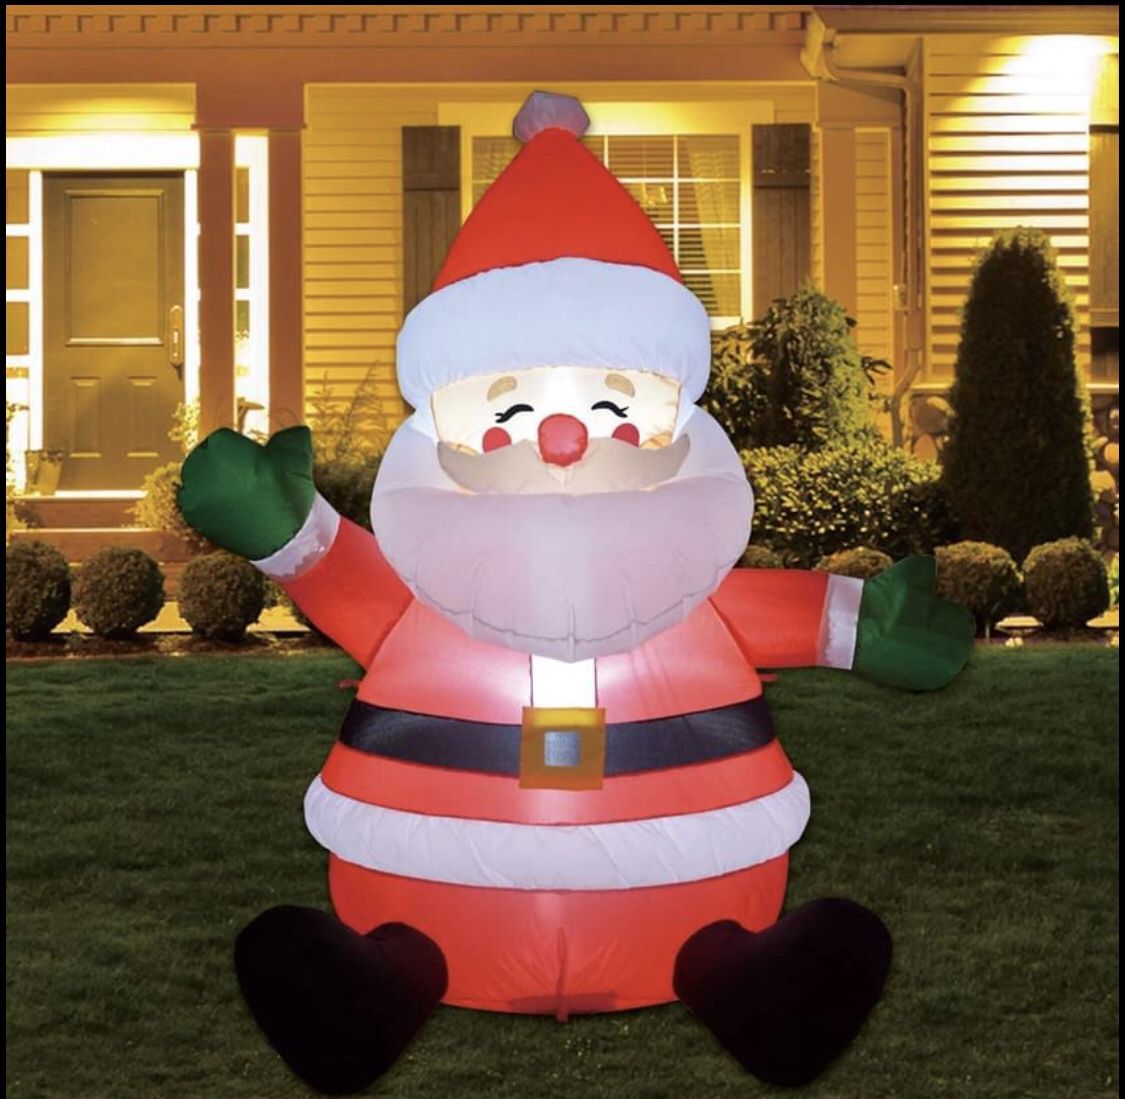 Santa Claus Inflatable Christmas Holiday Decoration Outdoor Yard Lawn 5 FT LED Lights